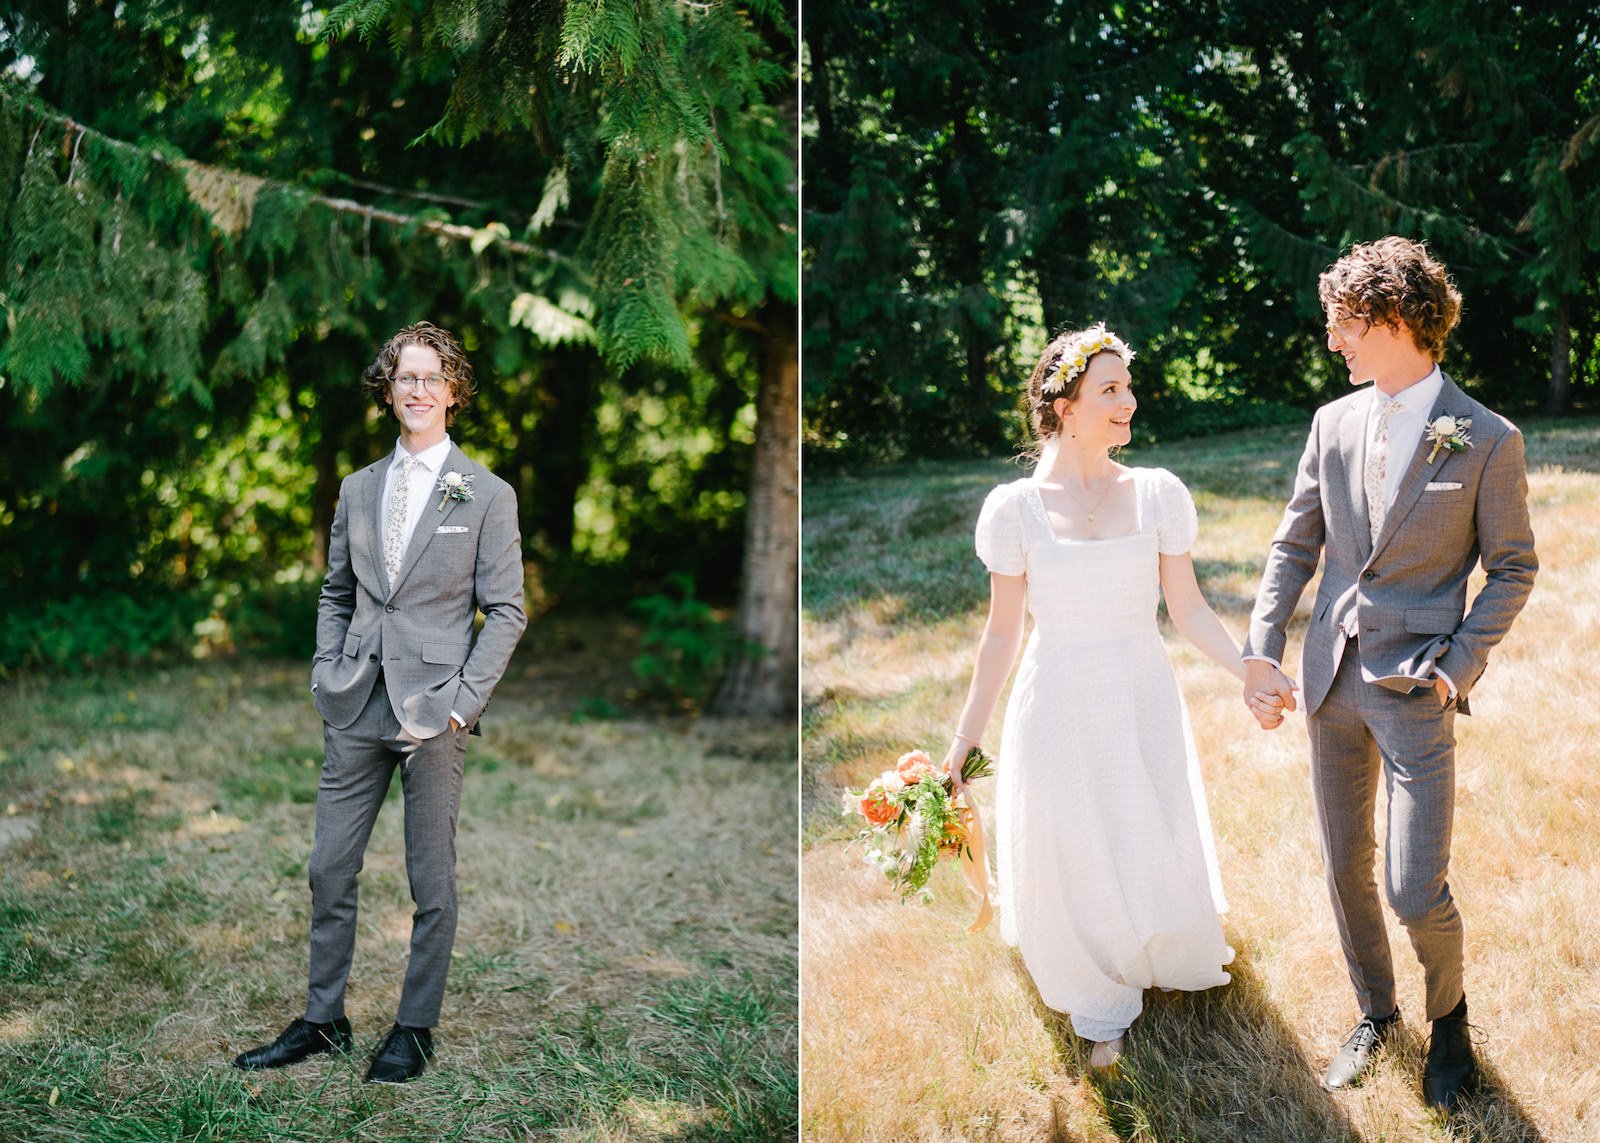  Solo portrait of groom with grey suit and floral yellow tie in front of fir trees 